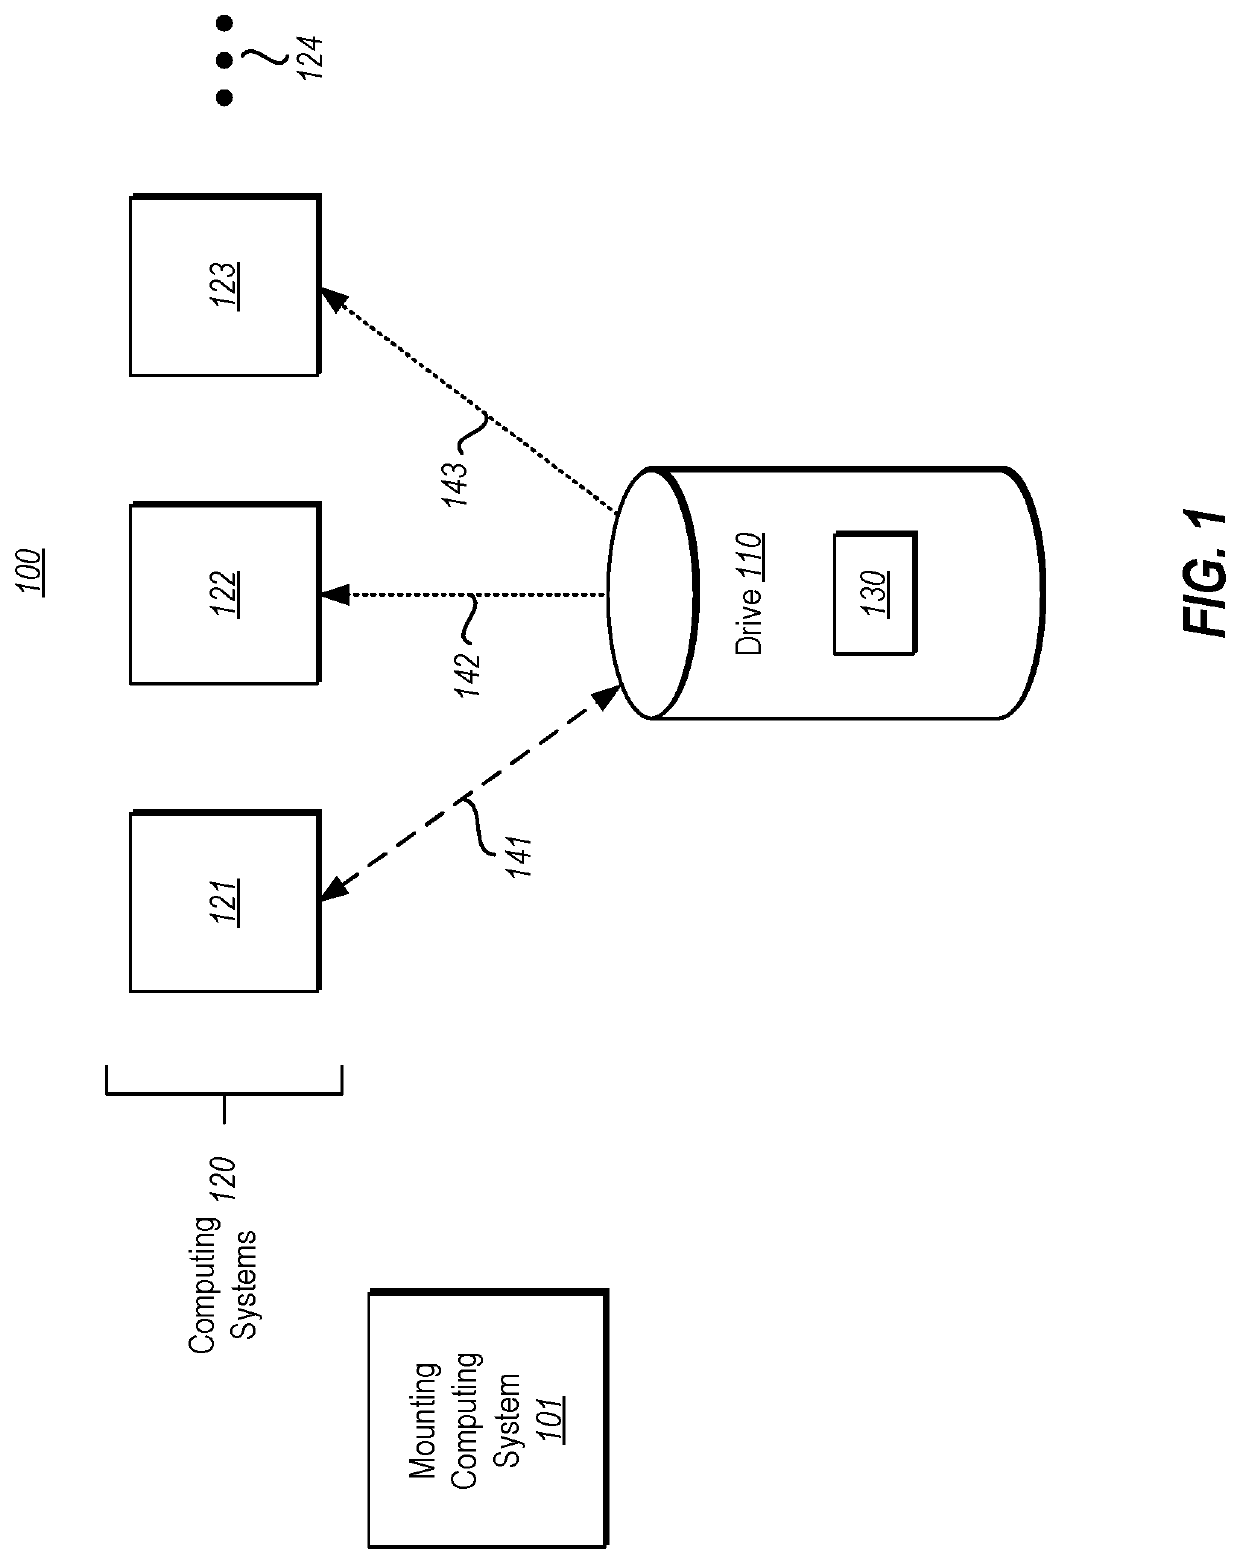 Mounting a drive to multiple computing systems